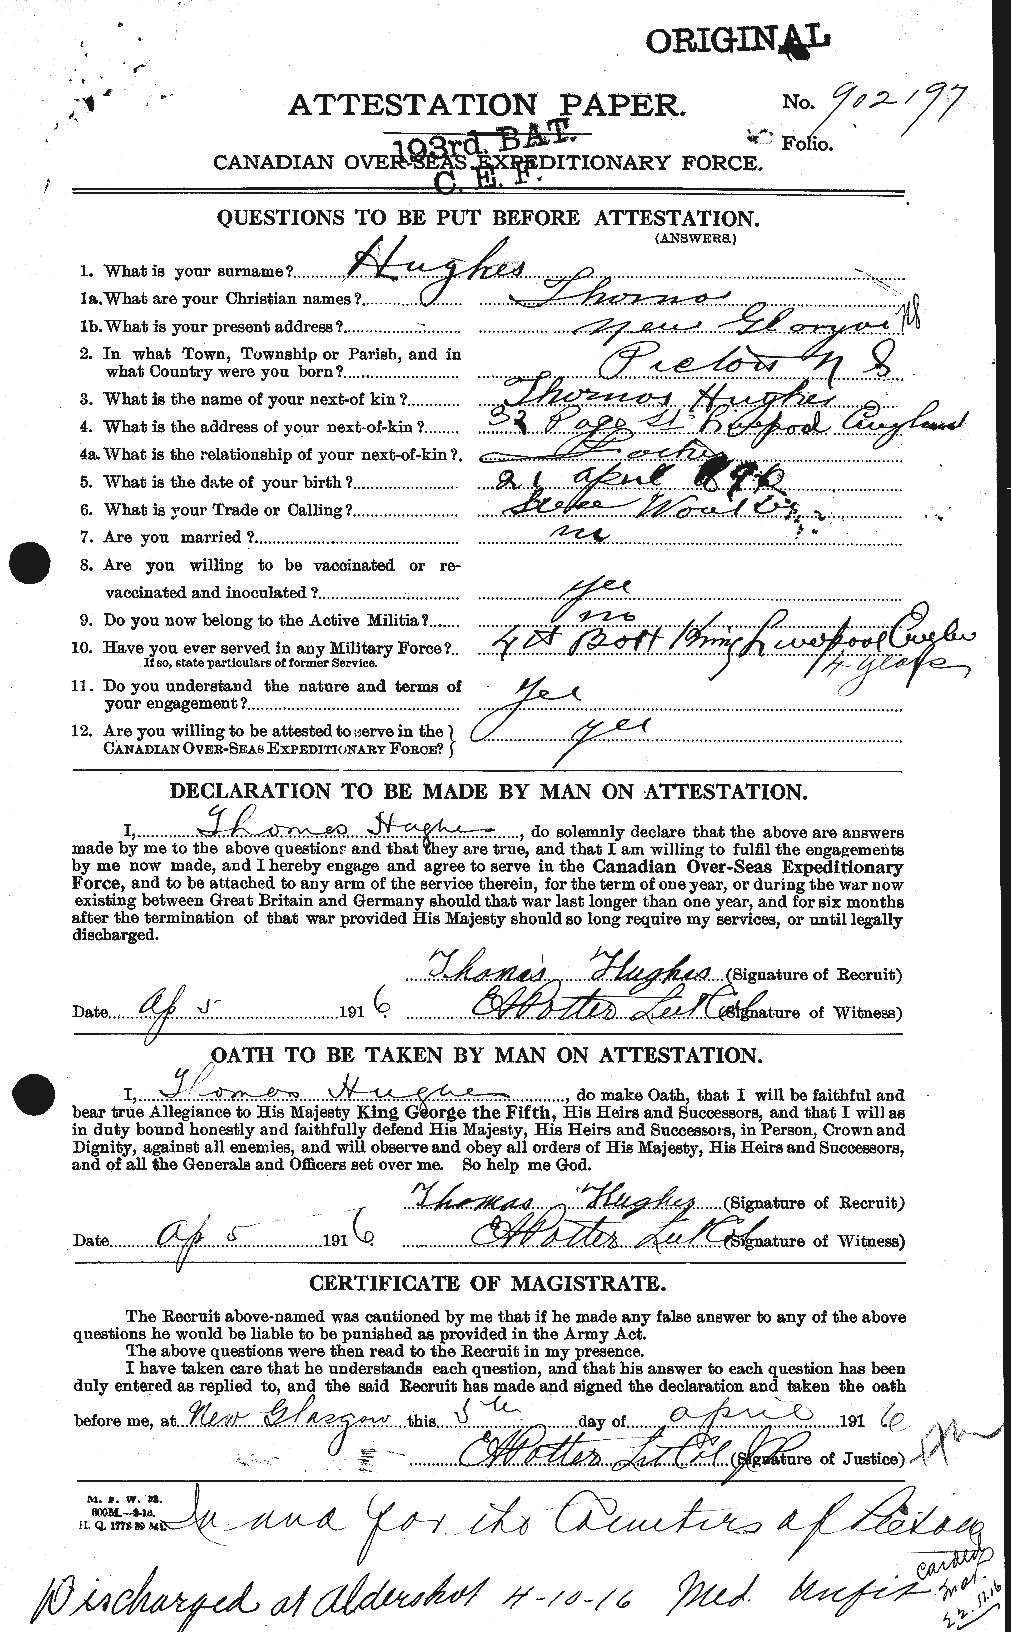 Personnel Records of the First World War - CEF 406675a